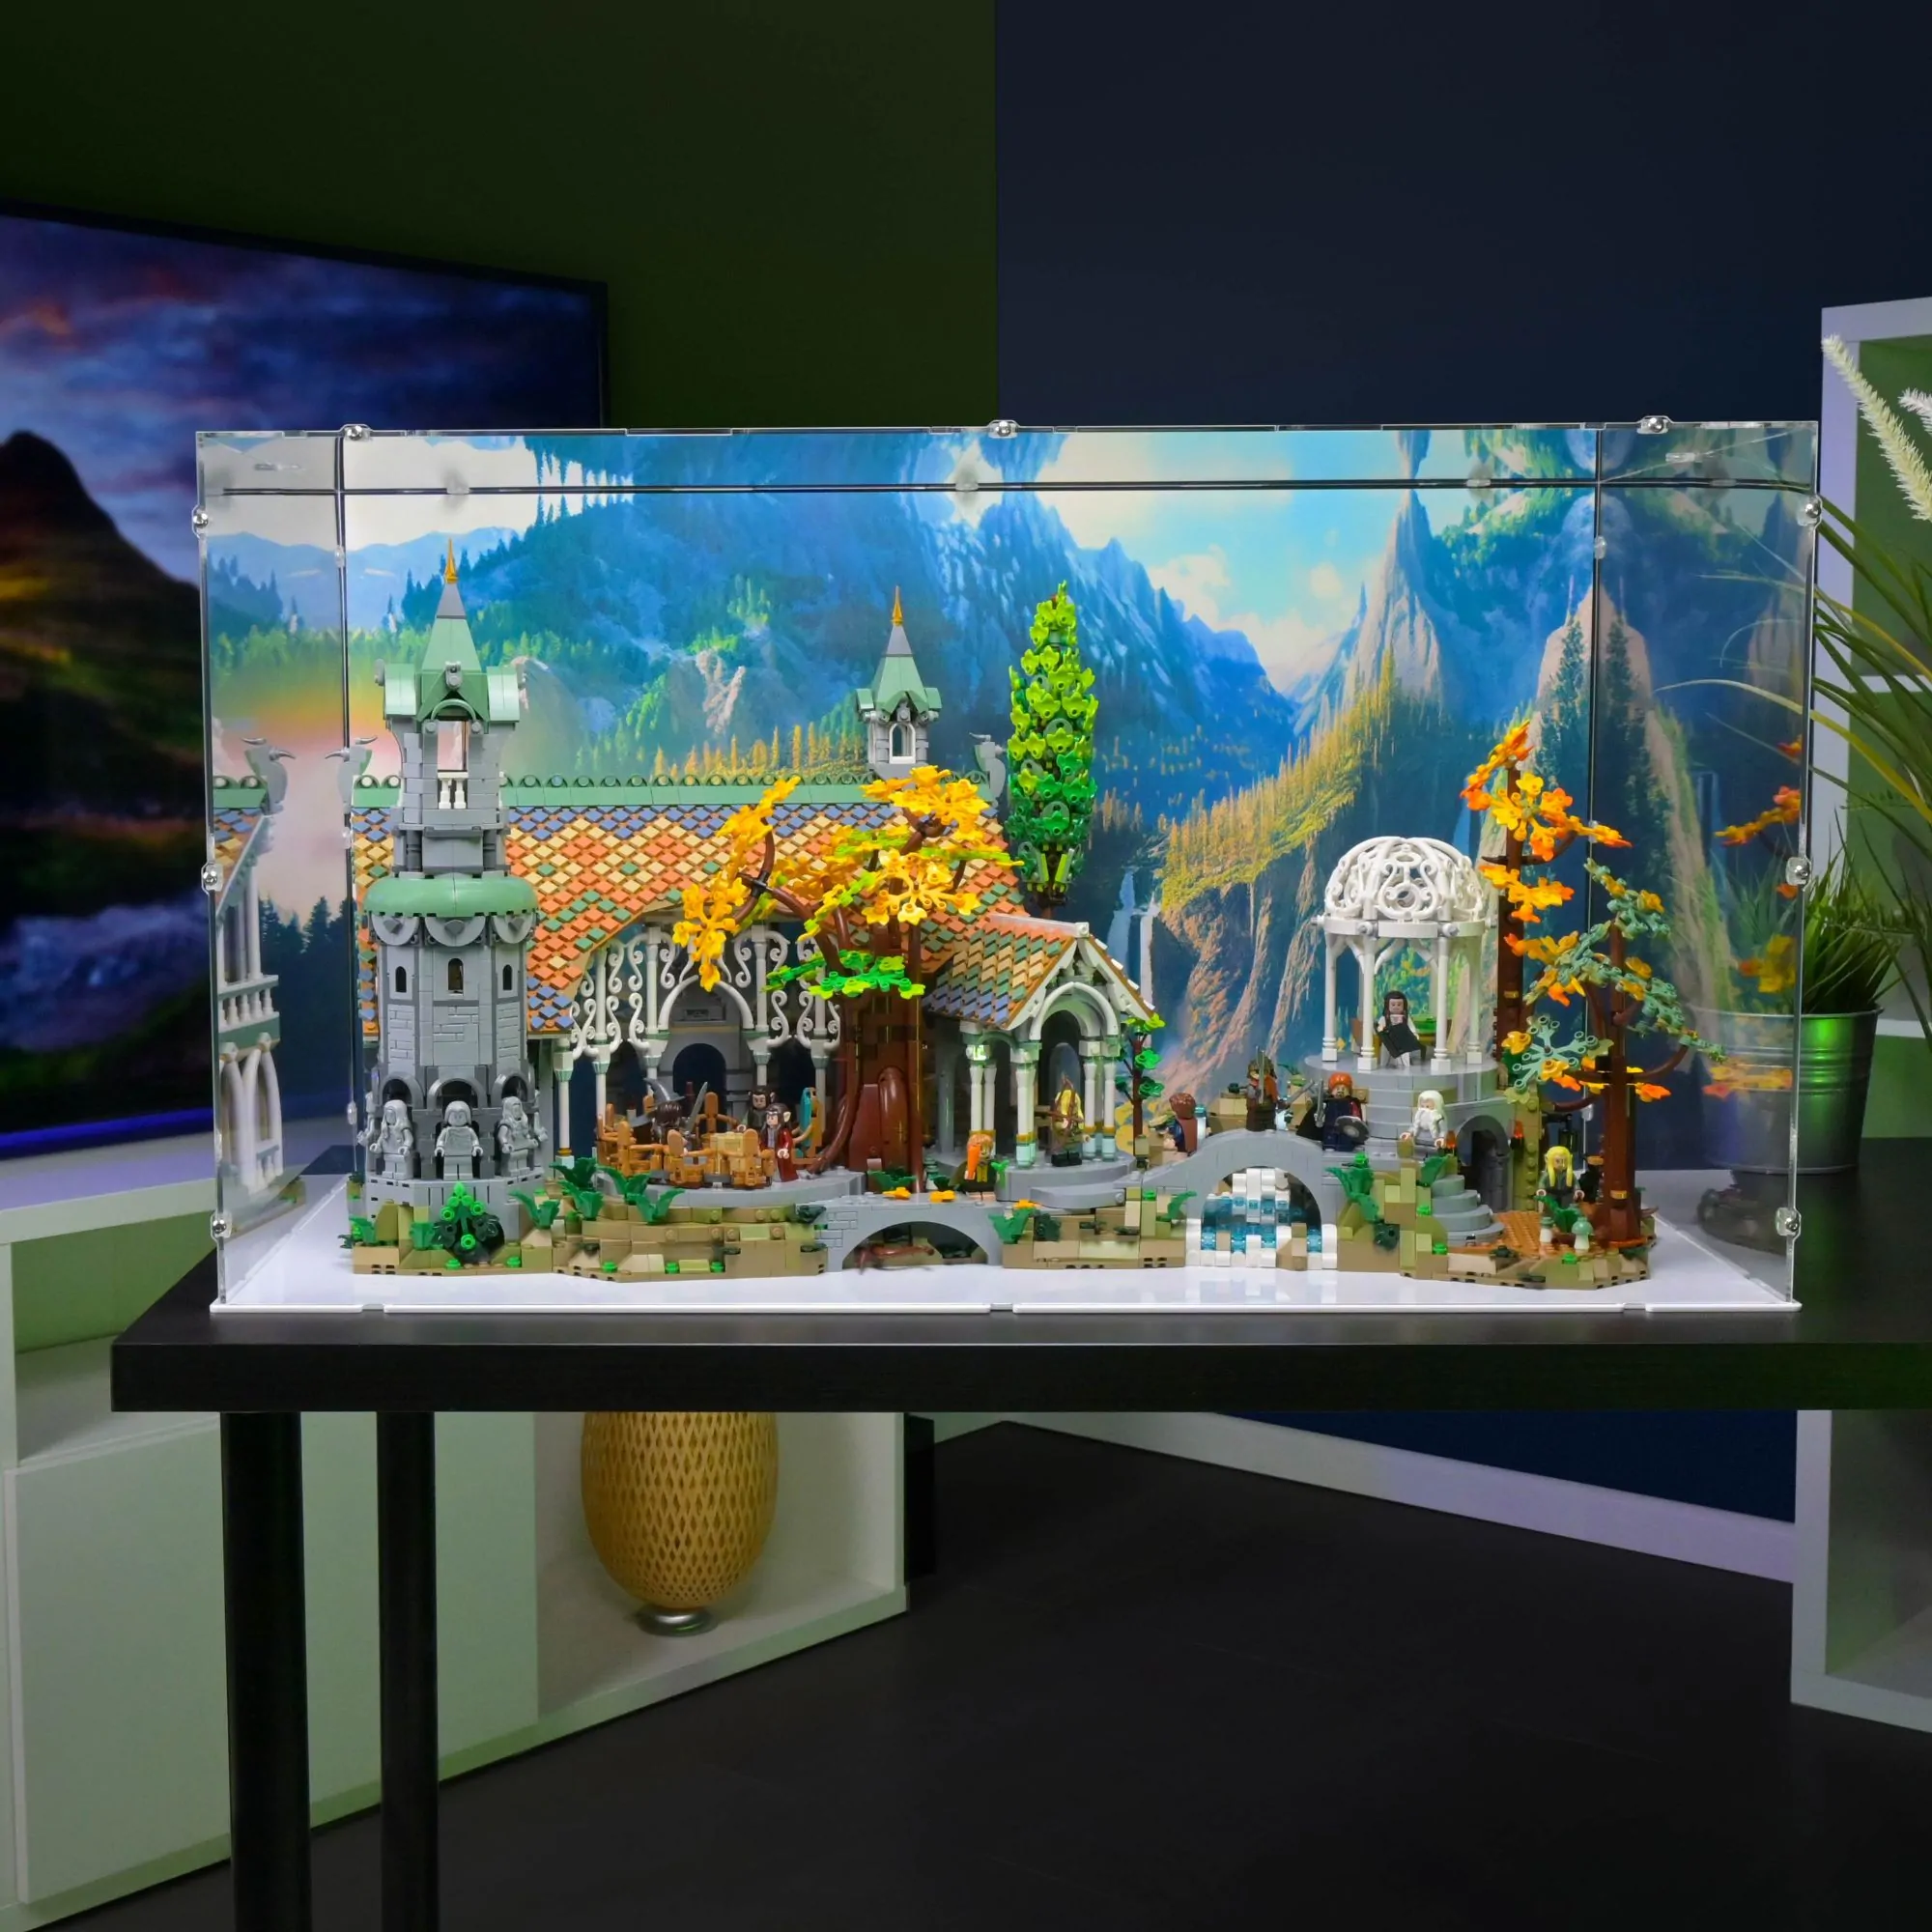 https://www.idisplayit.com/images/detailed/88/lego-lord-of-the-rings-rivendell-display-case-10-1.webp